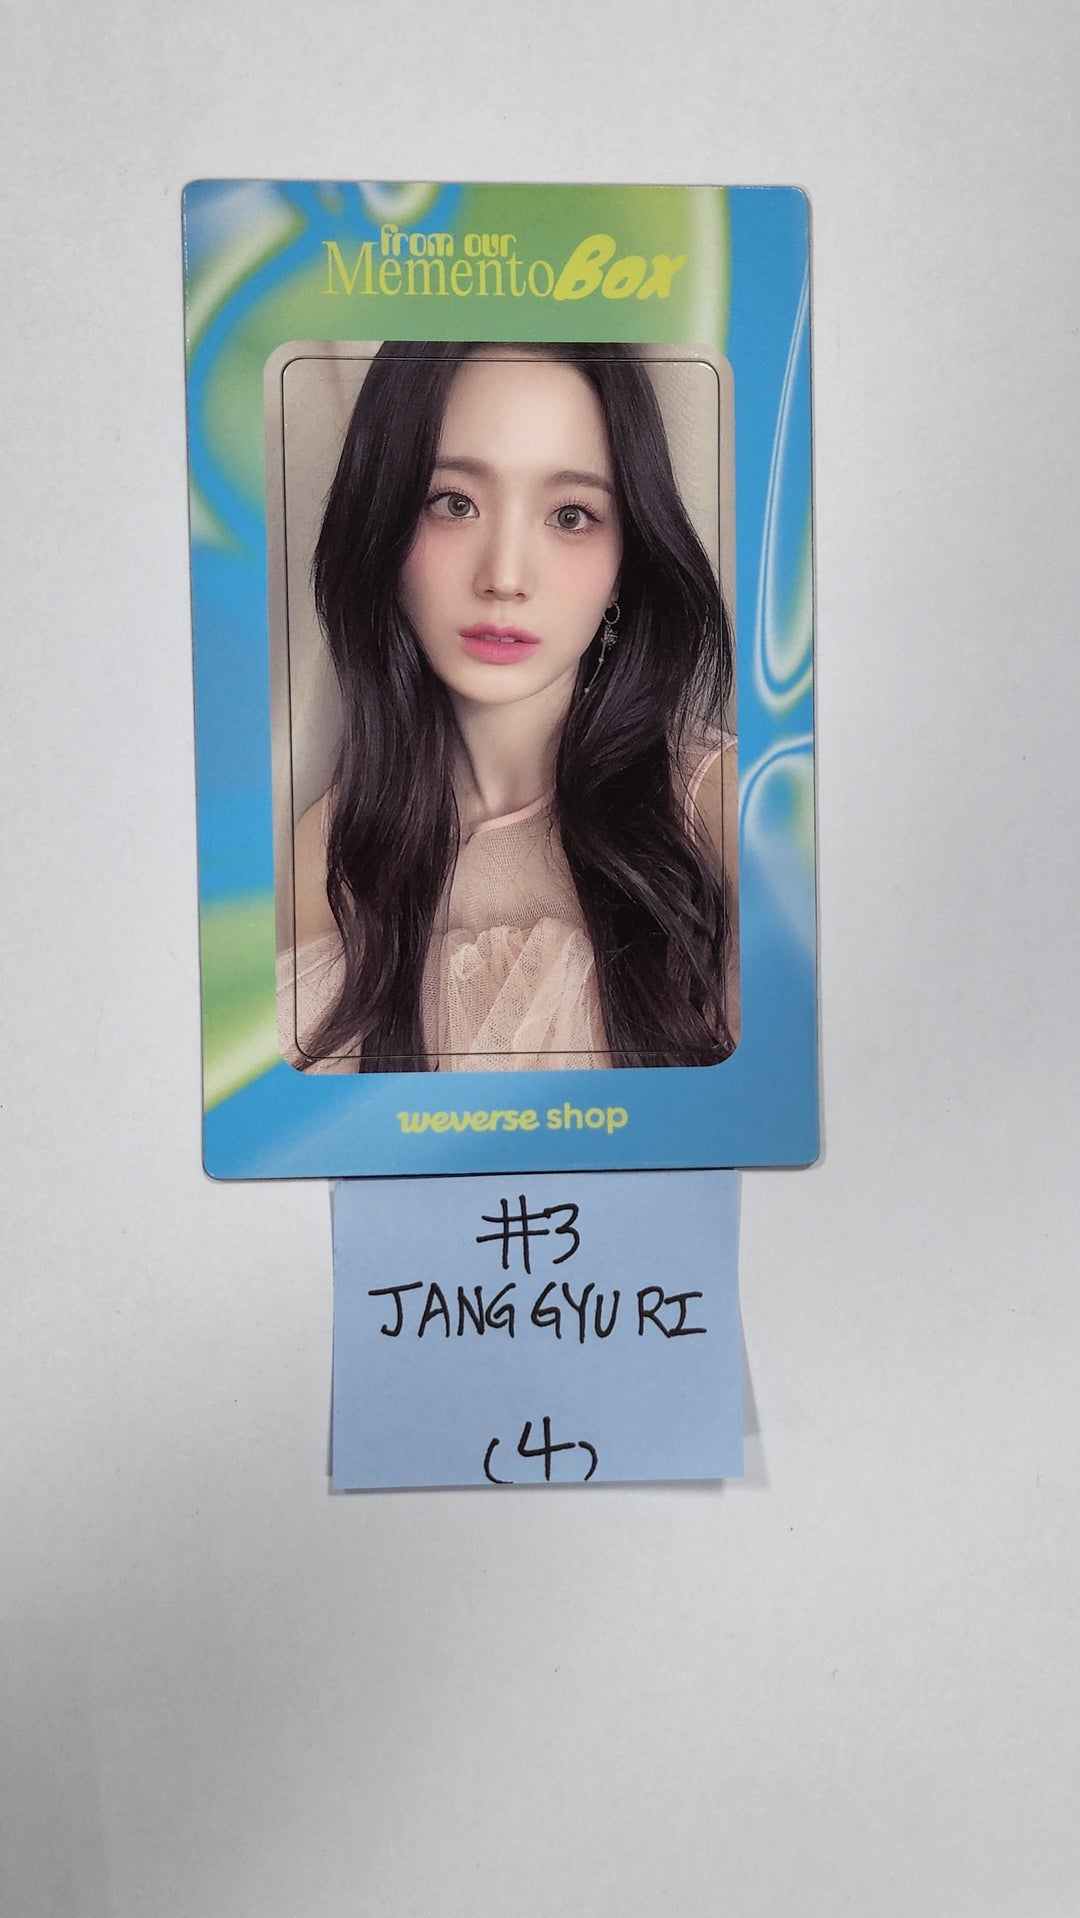 Fromis_9 "from our Memento Box" - Weverse Shop Pre-Order Benefit Magnet + Photocard Set